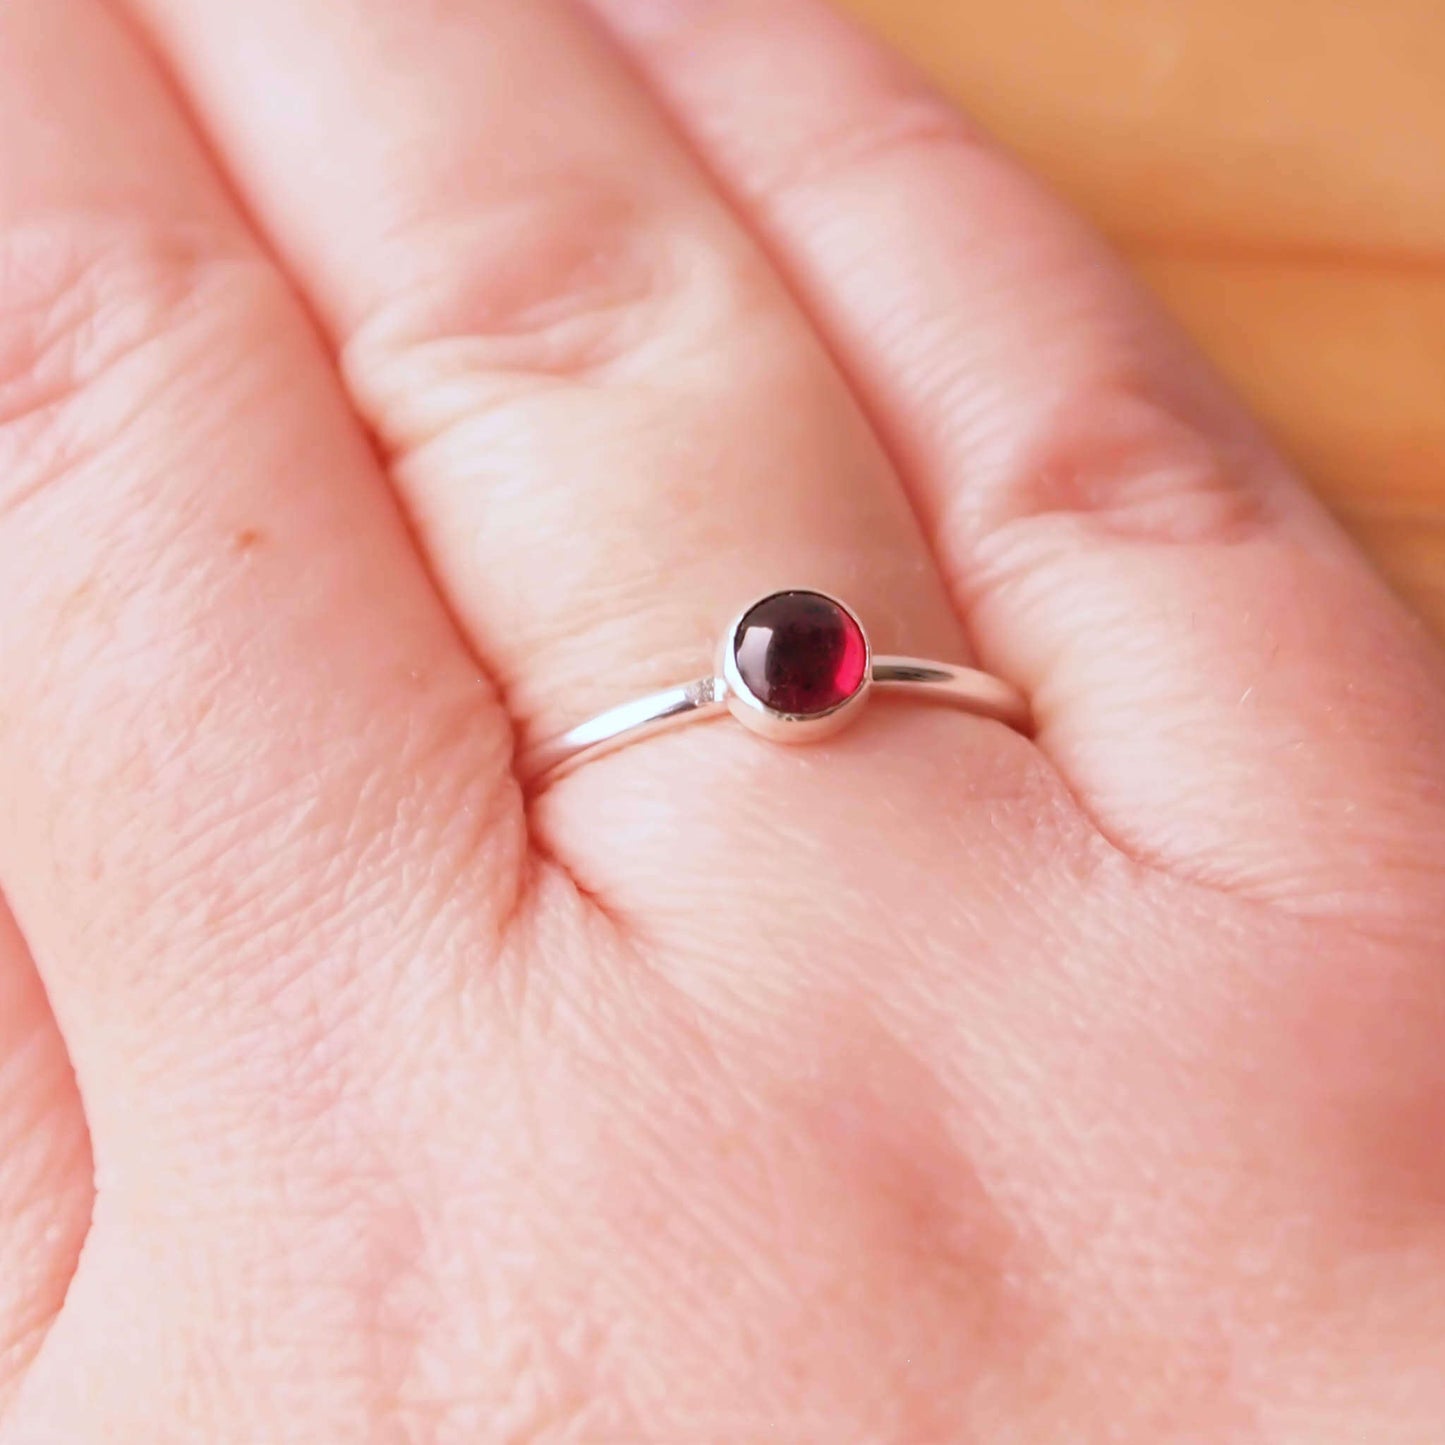 Garnet and Sterling Silver January Birthstone Ring. a 5mm round deep red garnet cabochon set very simply onto a round band of sterling silver. handmade by maram jewellery in Scotland